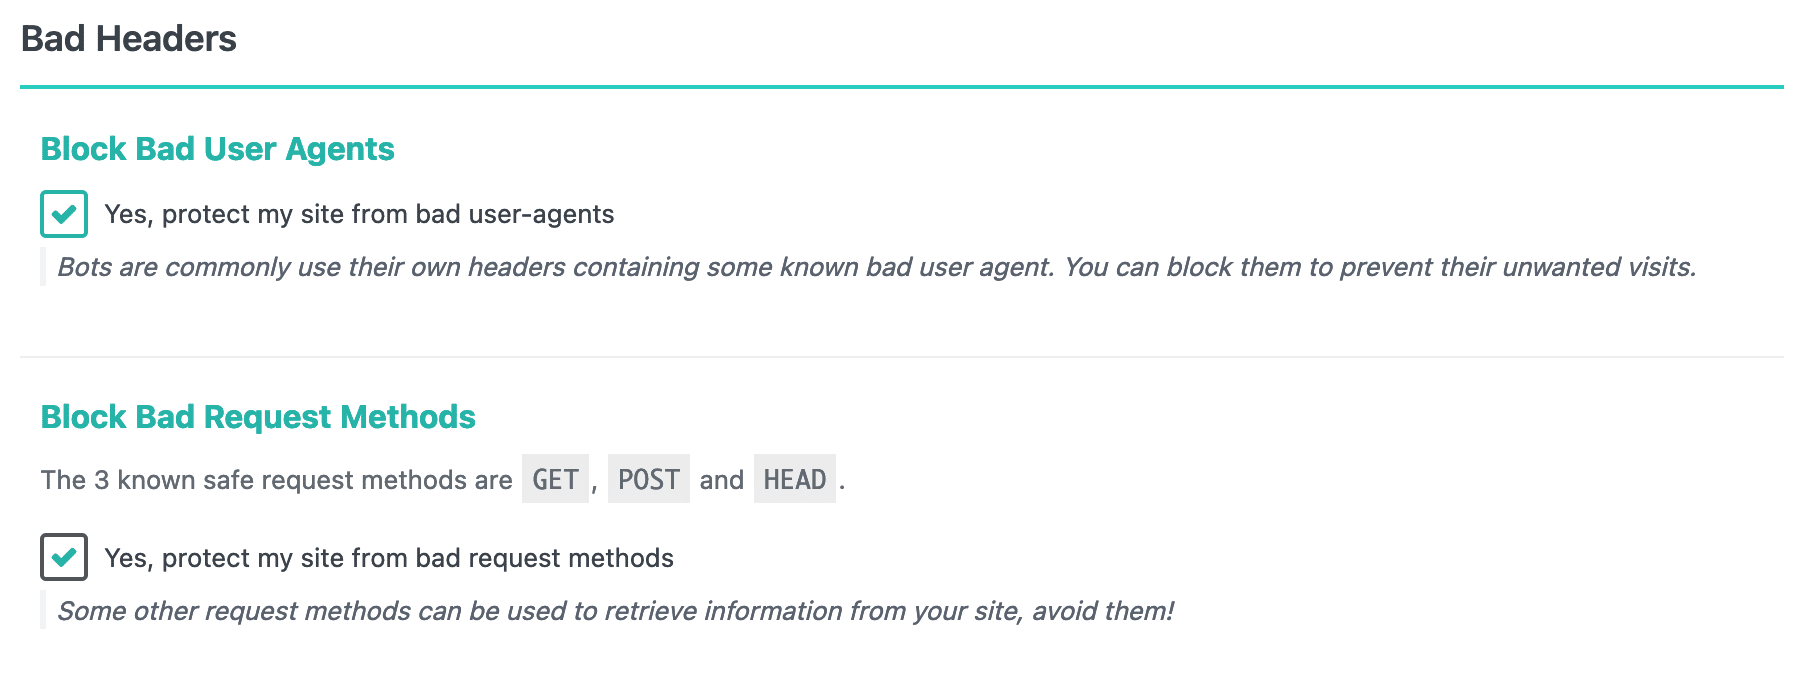 The firewall allows you to block bad requests and user-agents.